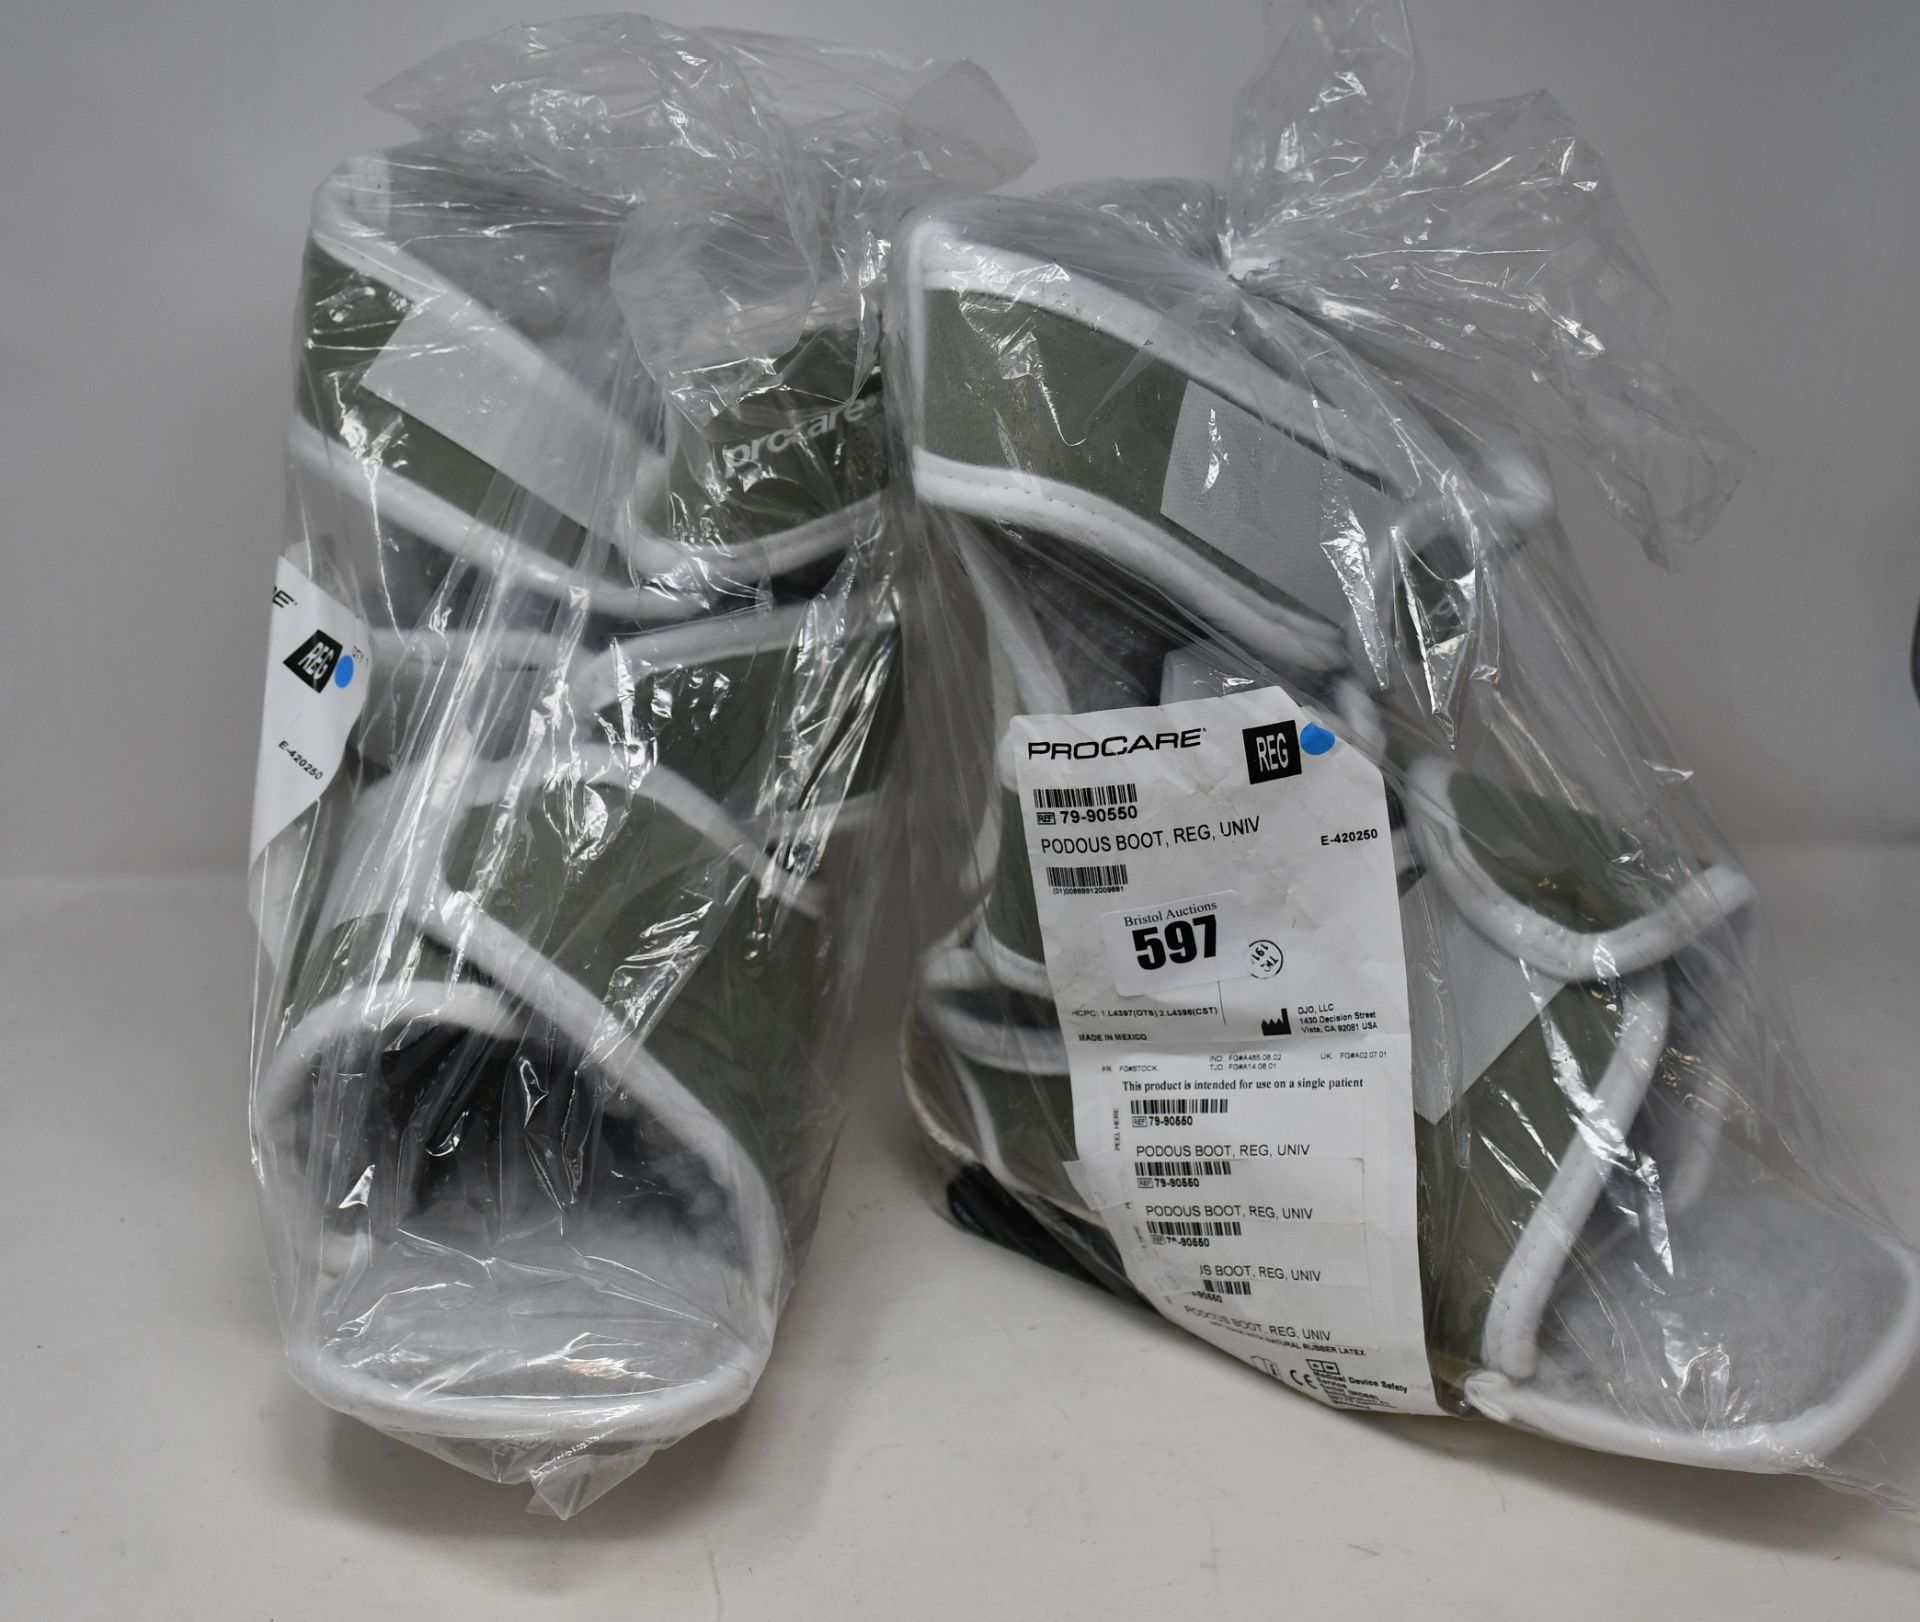 Two as new ProCare 79-90550 Podous Boots (Regular).